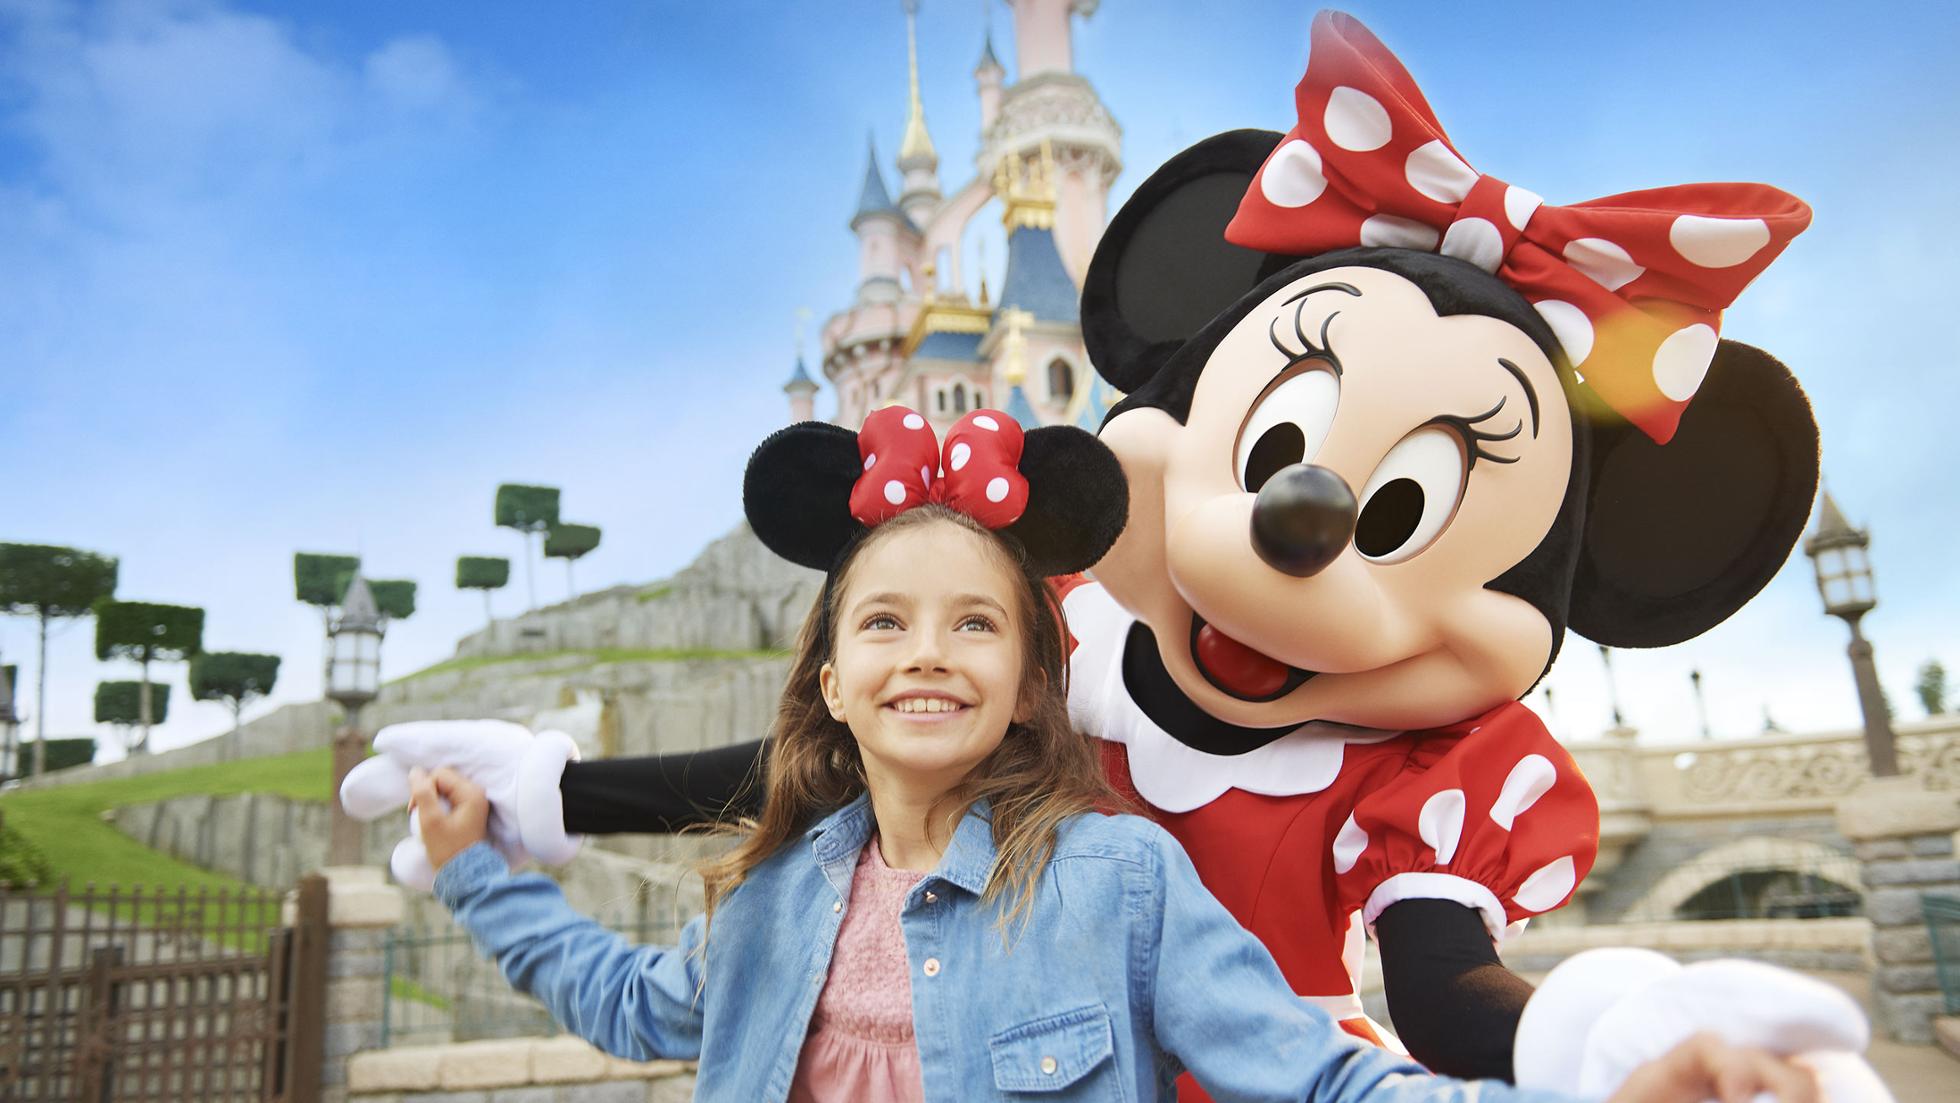 Meet and Greet across Europe with Minnie or her friends